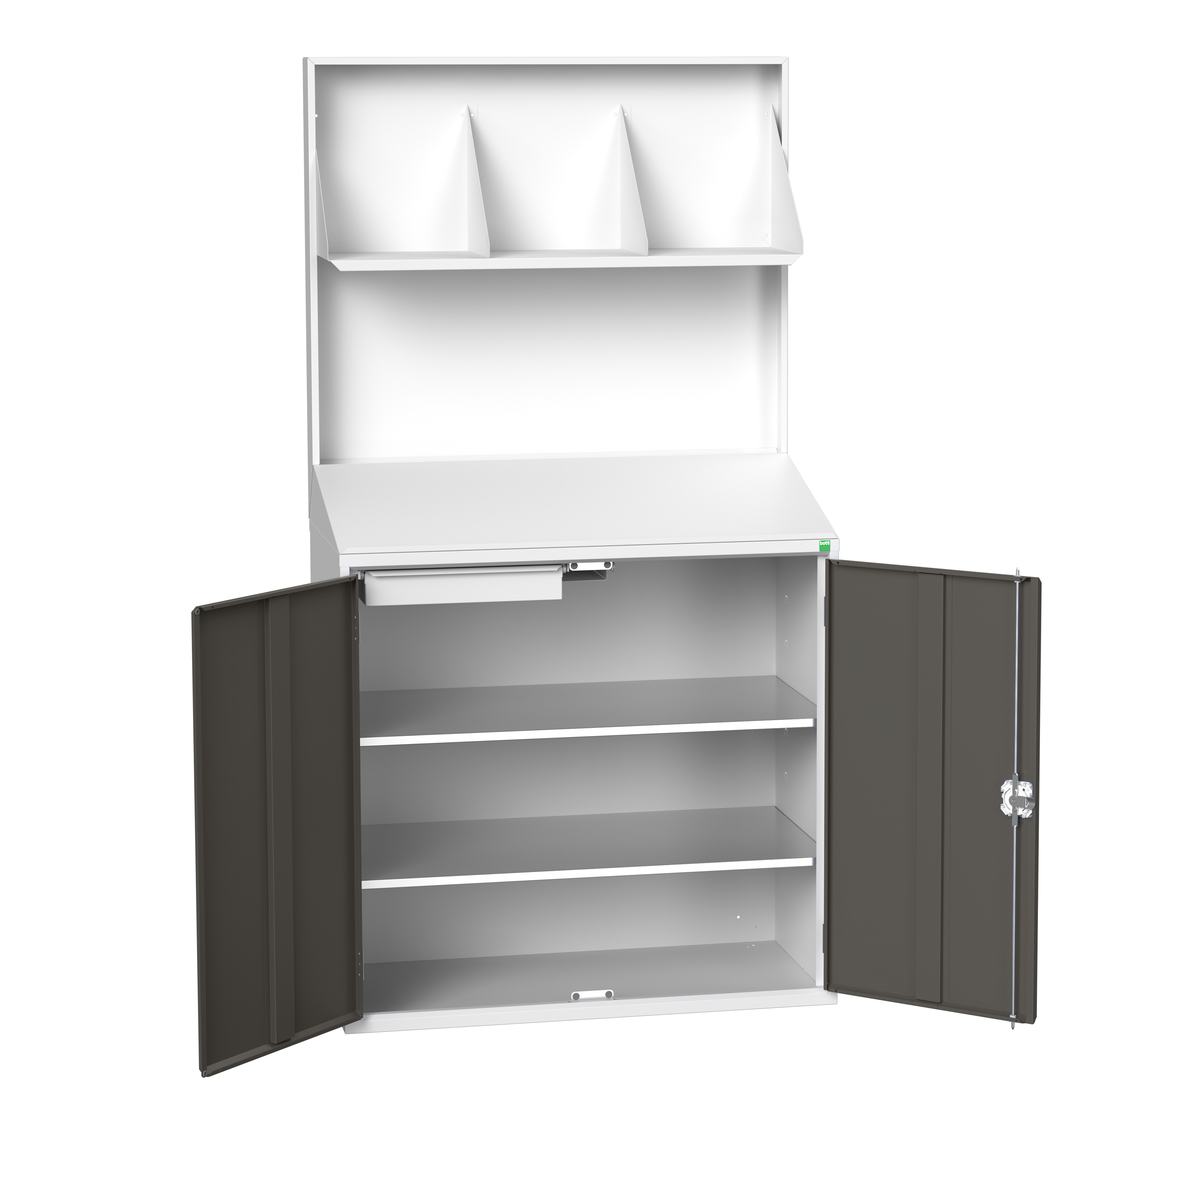 16929218.19 - verso economy lectern with backpanel